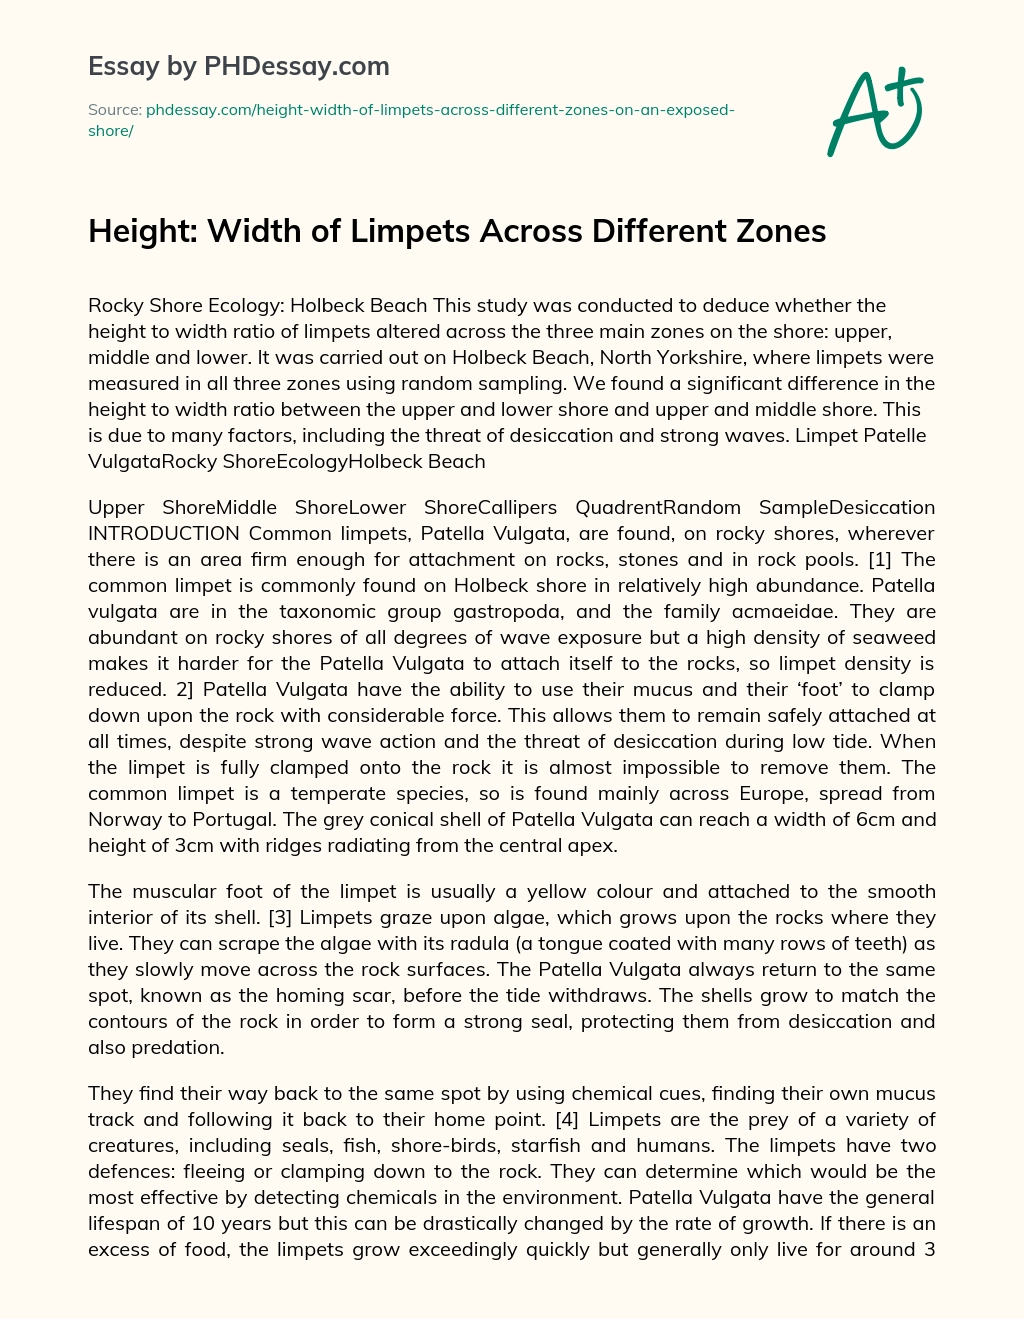 Height: Width of Limpets Across Different Zones essay